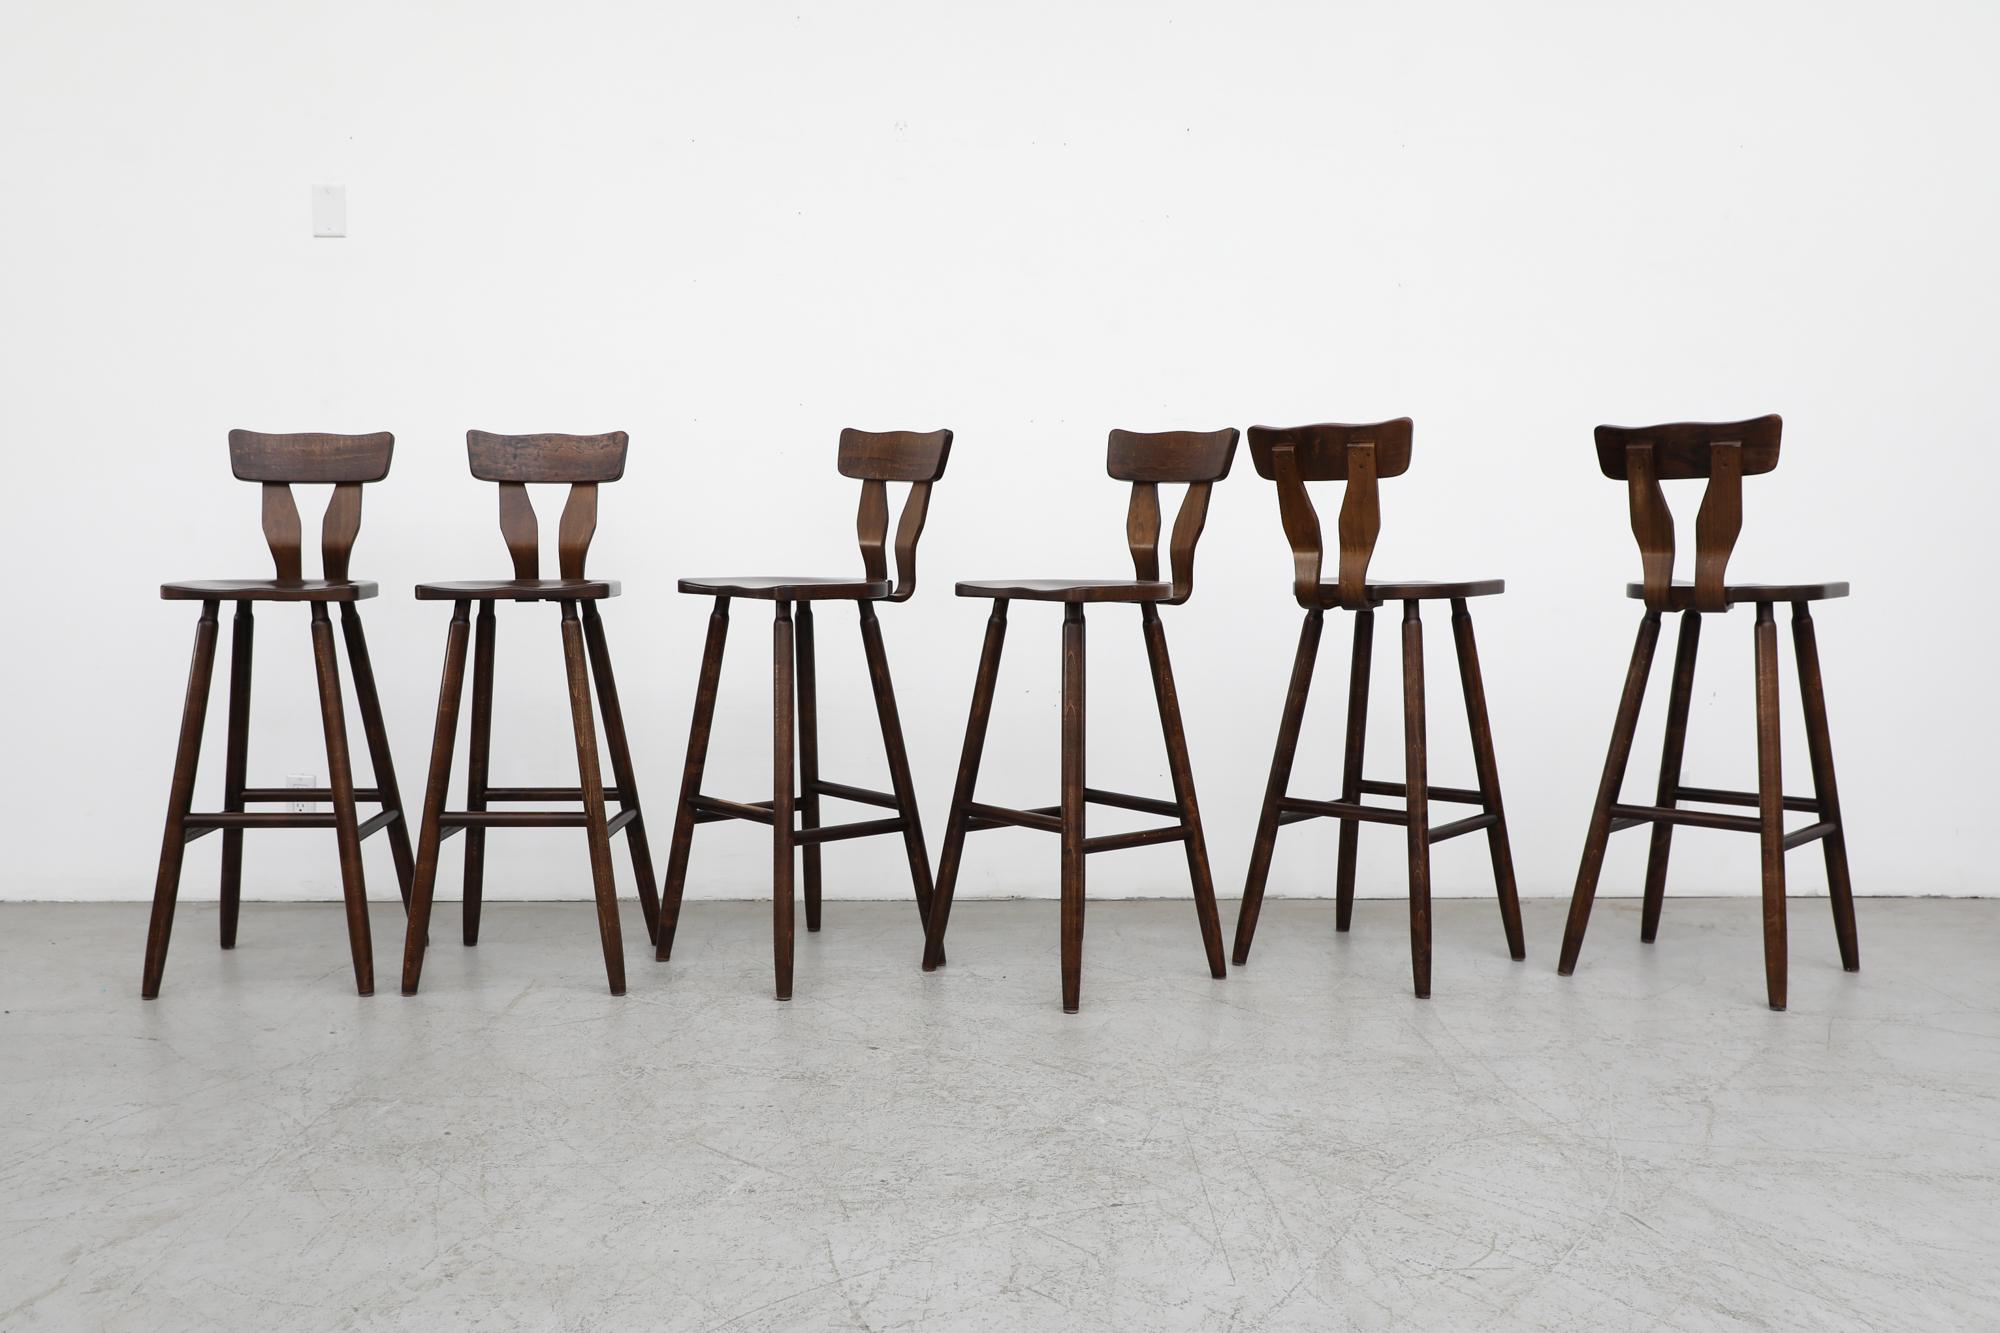 Set of 6 Pierre Chapo inspired T-back dark stained oak bar stools with tapered legs. In original condition with visible signs of use including some wear, consistent with their age and use. Similar set also available and listed separately. Set price.